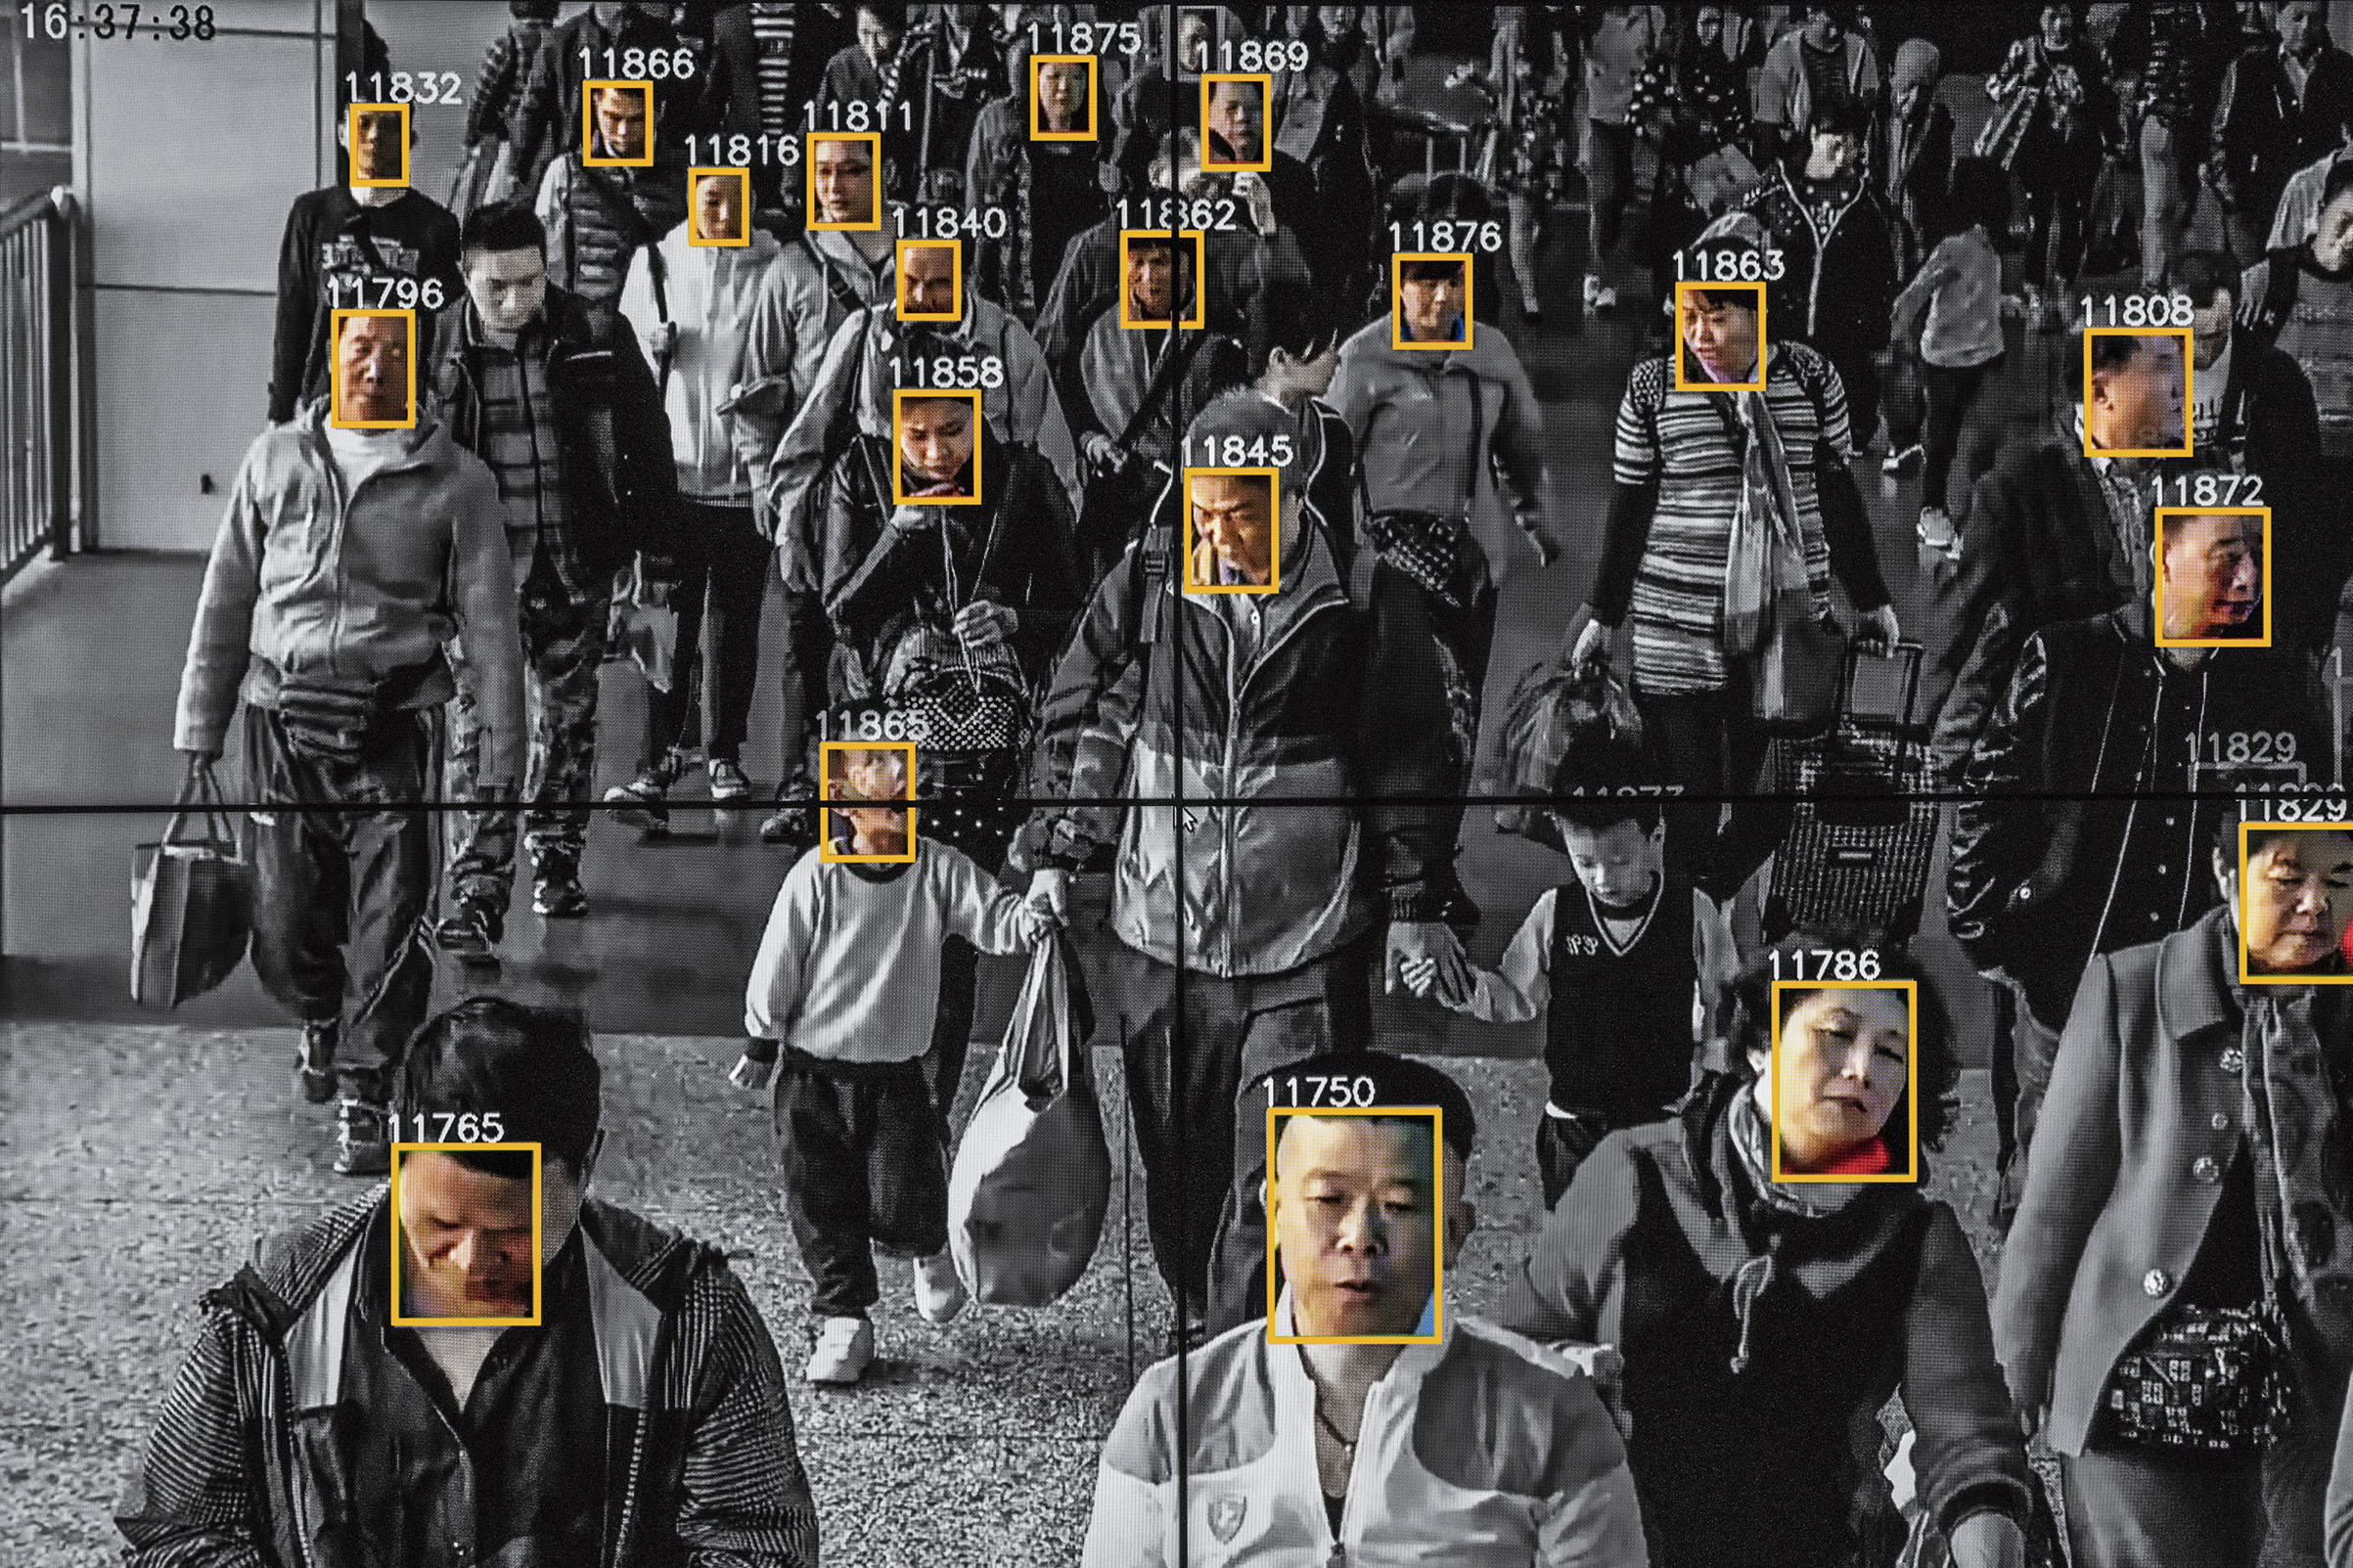 Facial recognition is one element of China’s expanding tracking efforts (Photo-Illustration by TIME: Source Photo: Gilles Sabrié—The New York Times/Redux)